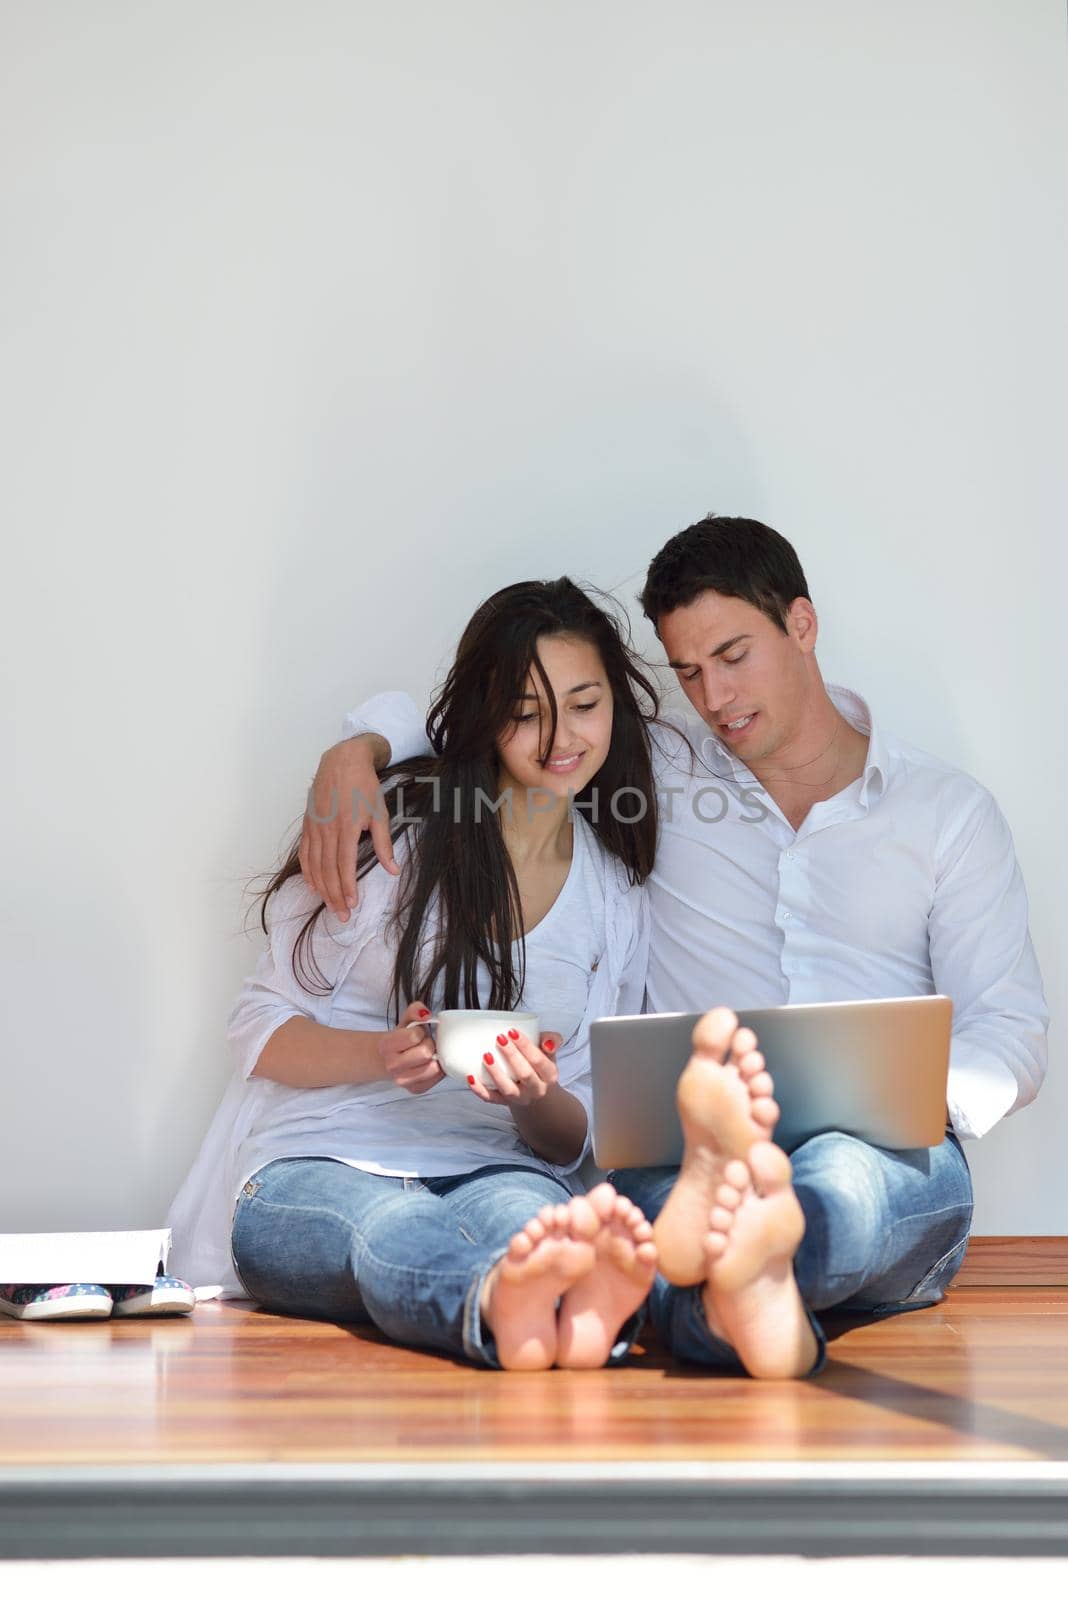 happy young relaxed  couple working on laptop computer at modern home indoor